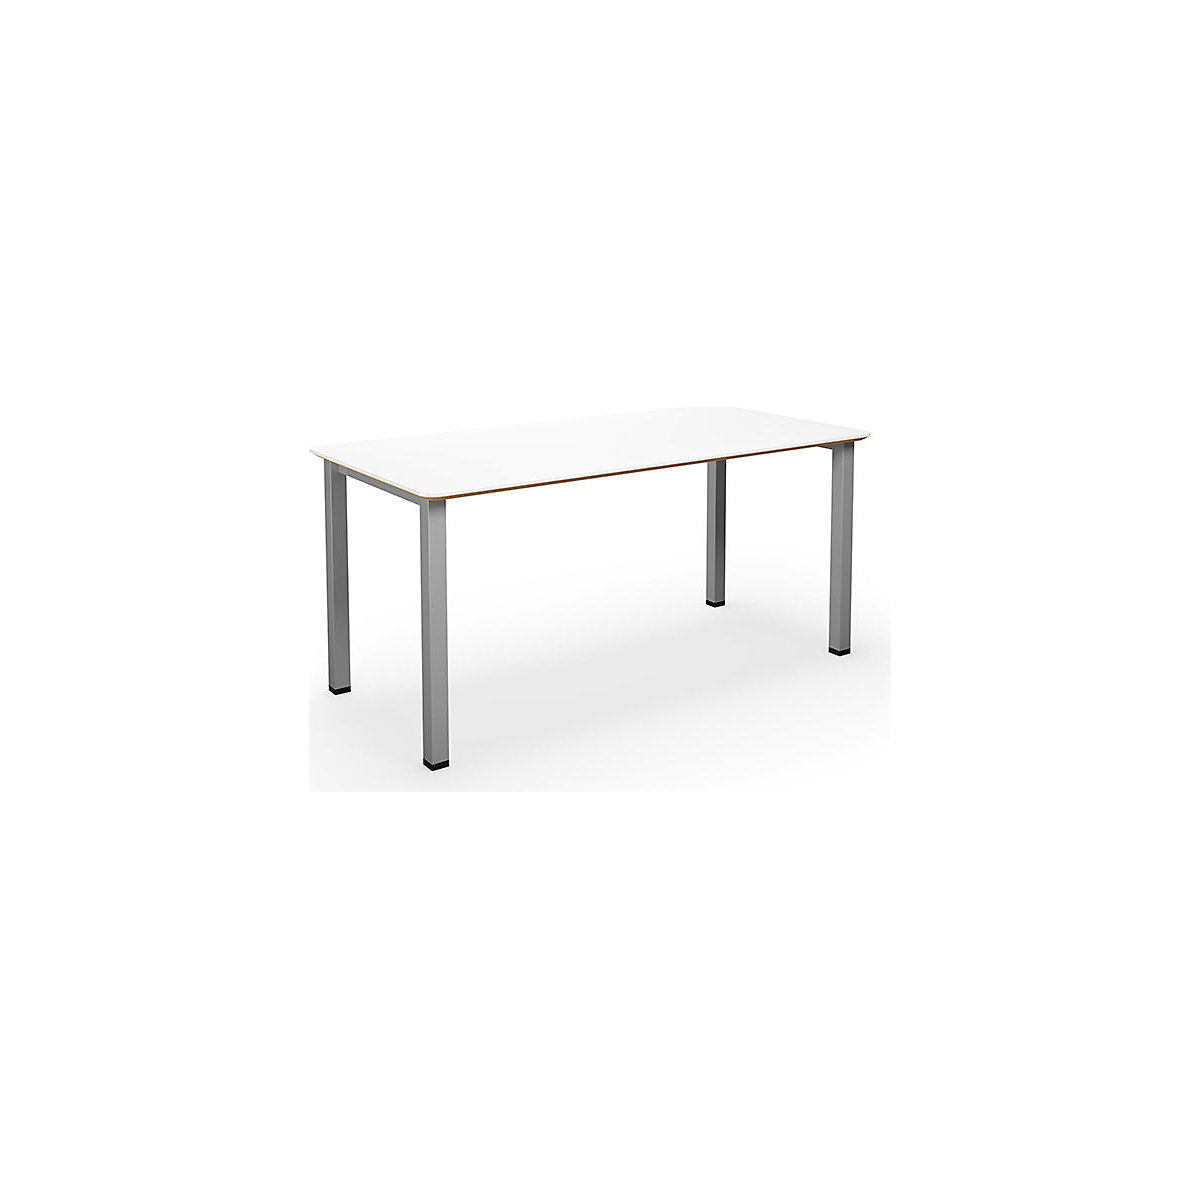 DUO-U Trend multi-purpose desk, straight tabletop, rounded corners, WxD 1600 x 800 mm, white, silver-5